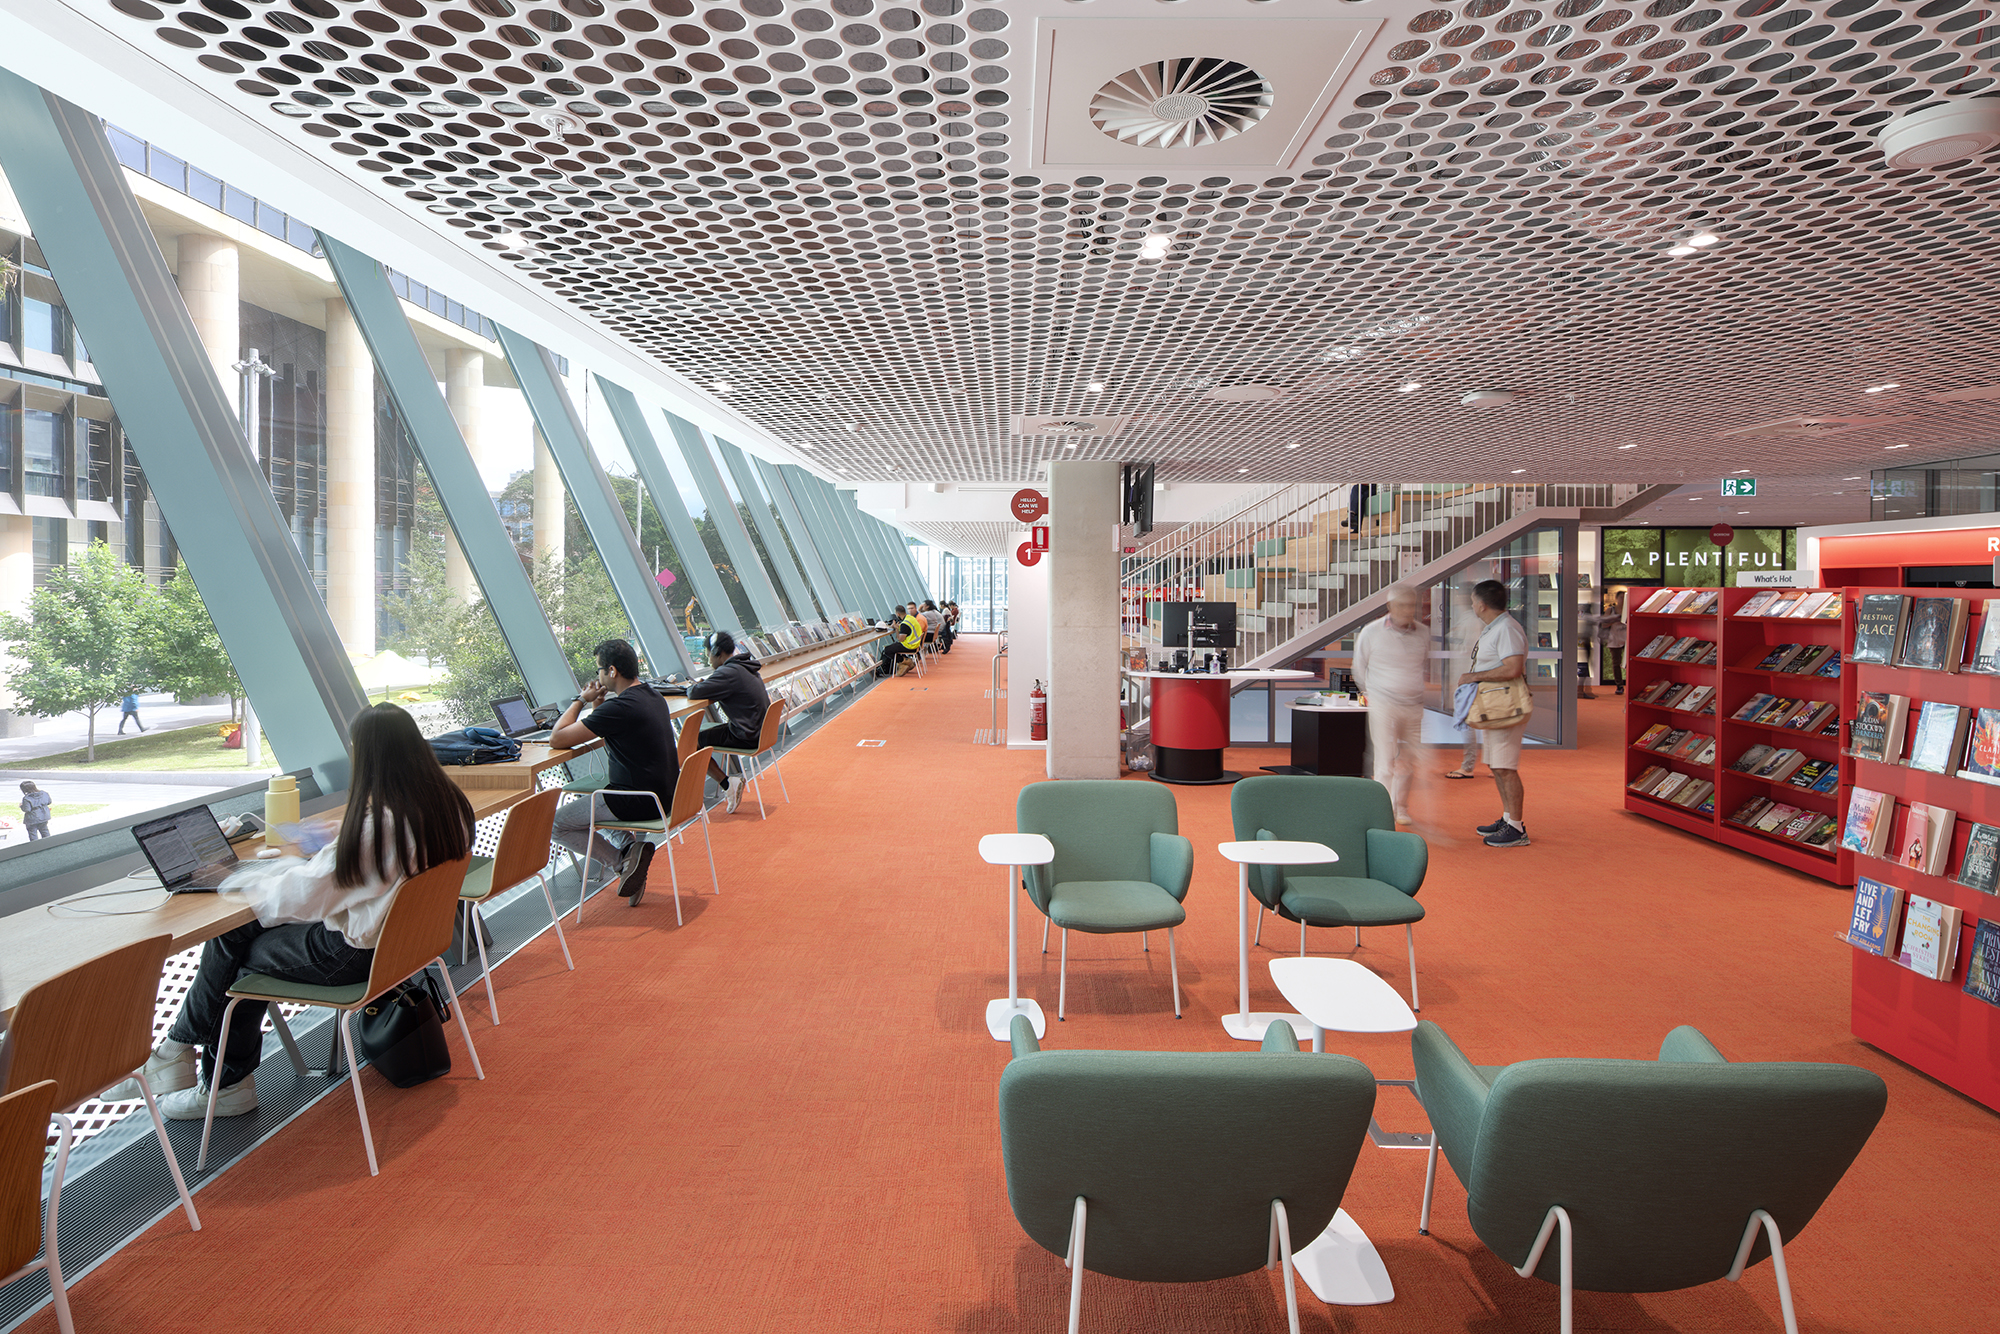 Library with study spaces